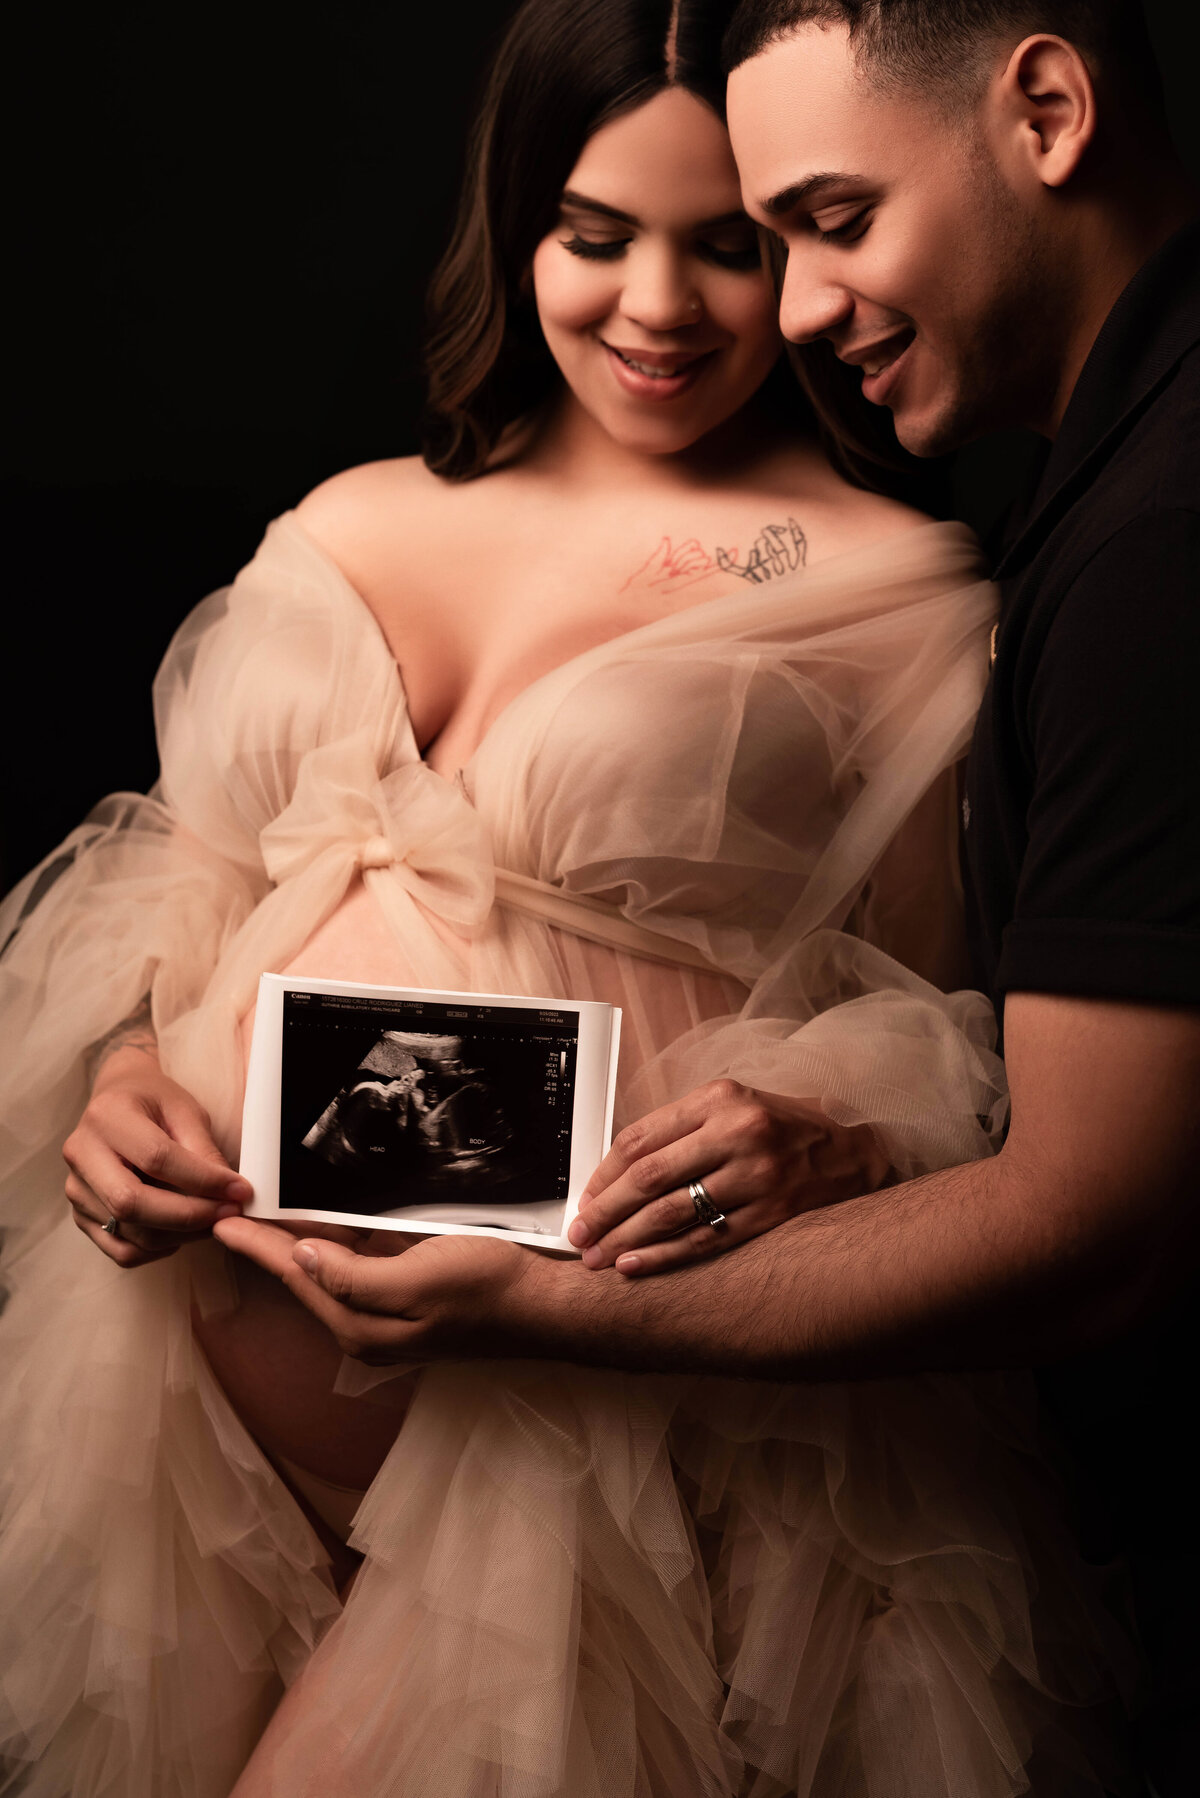 holding sono sonogram photo in hands at maternity session photoshoot in oswego